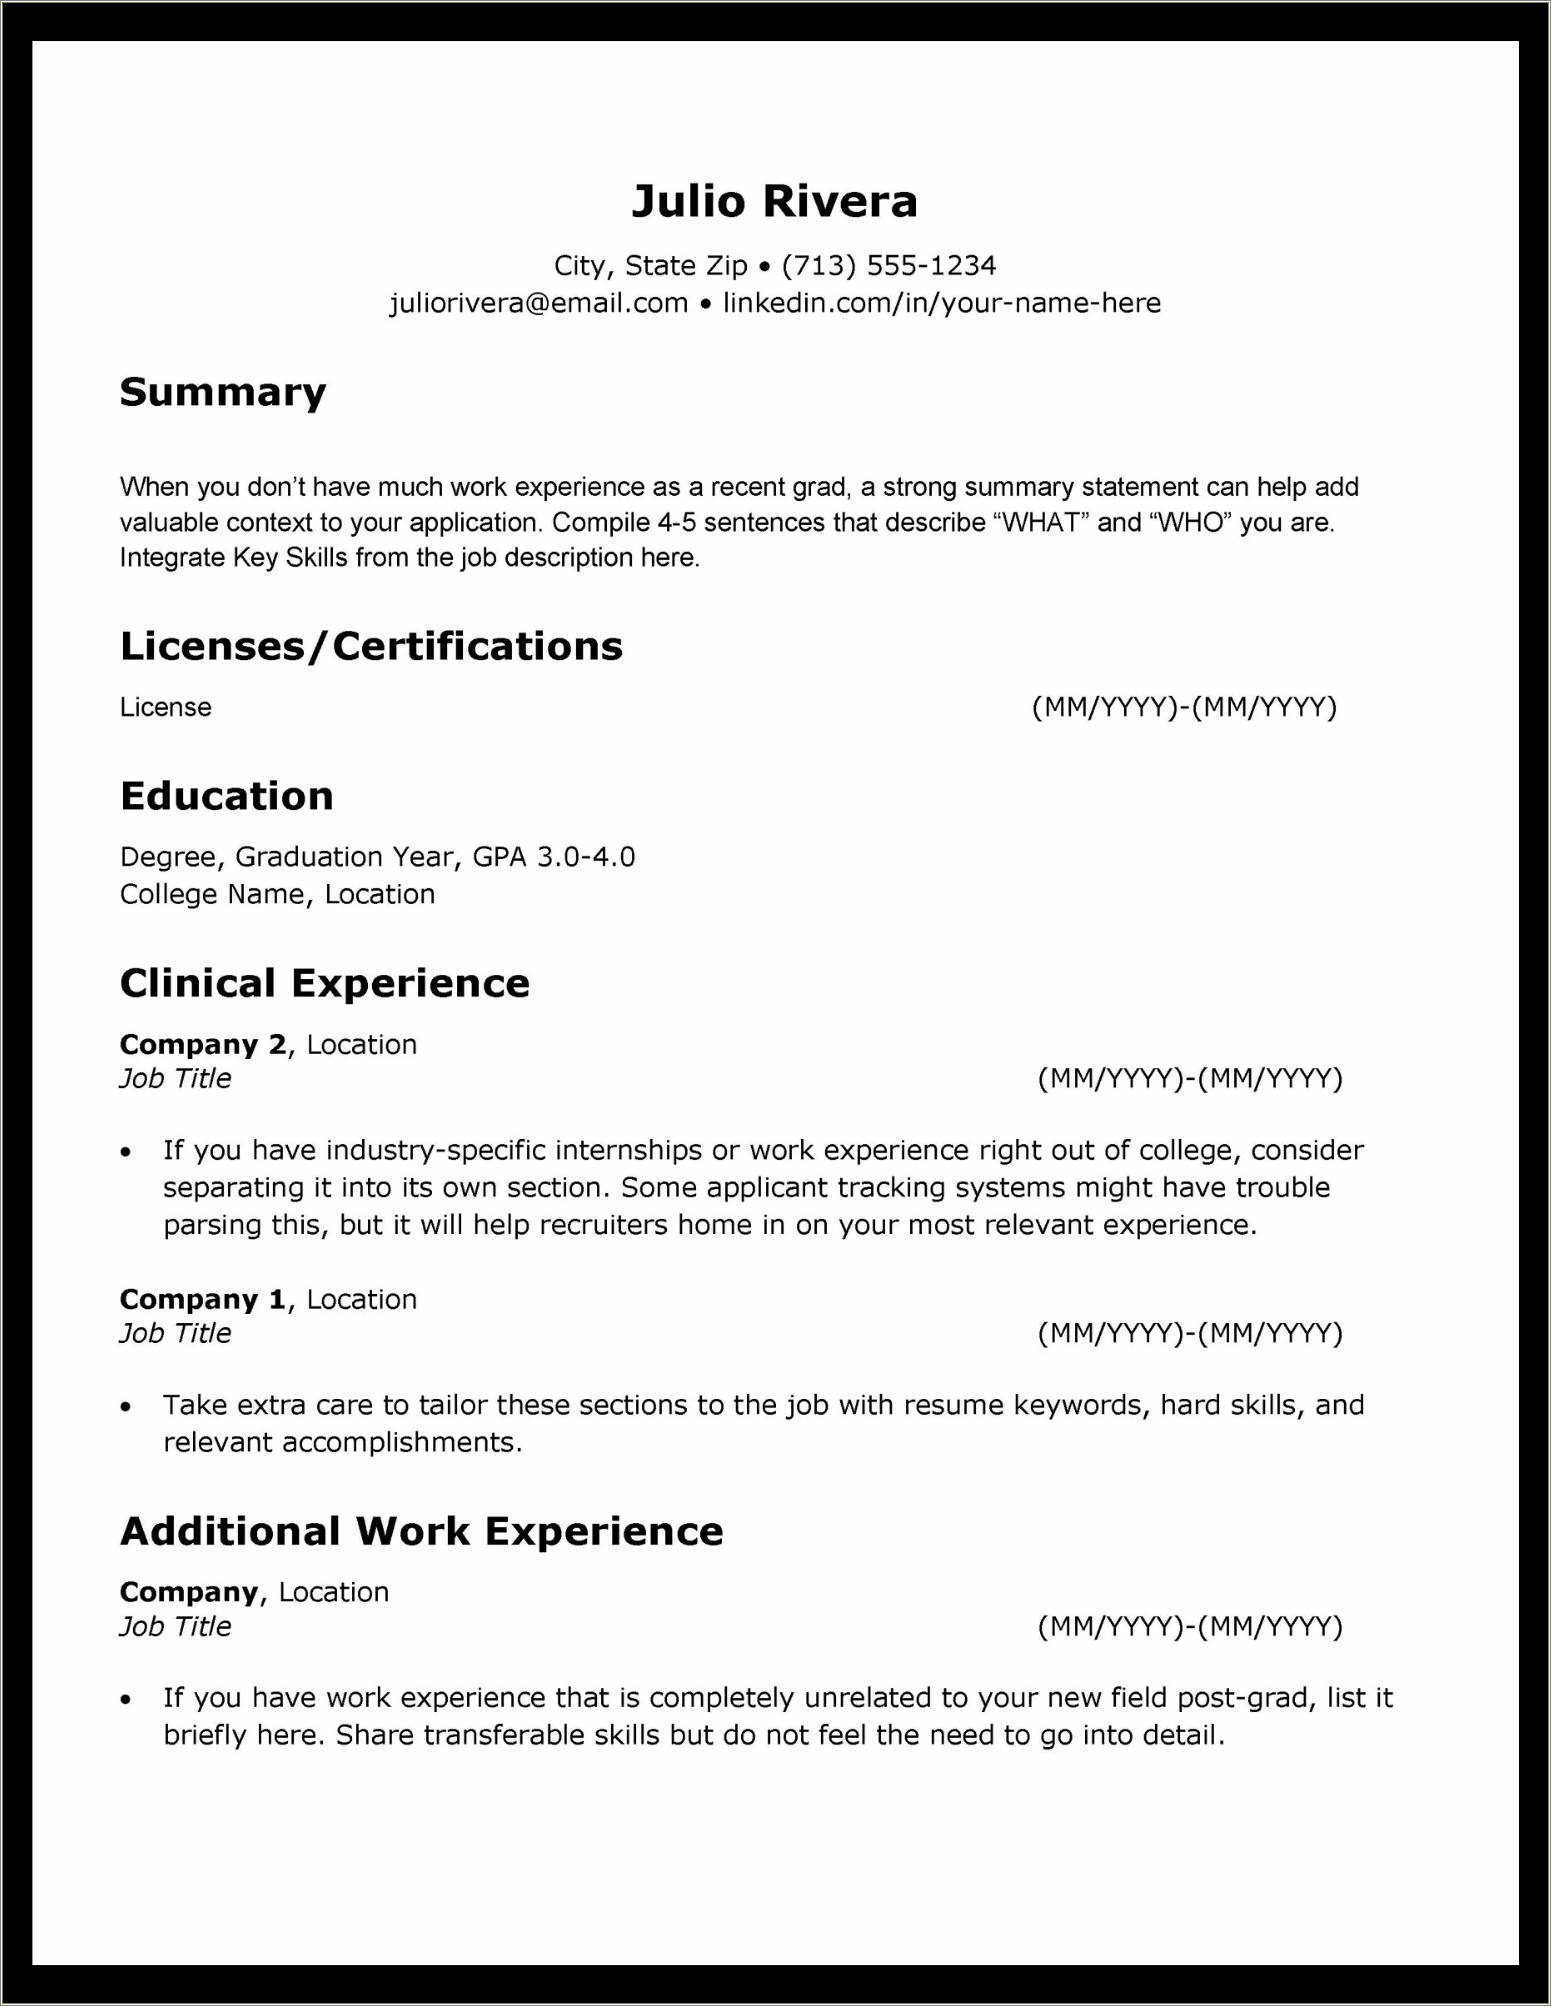 Emailing Resume Where There Is No Job Posint